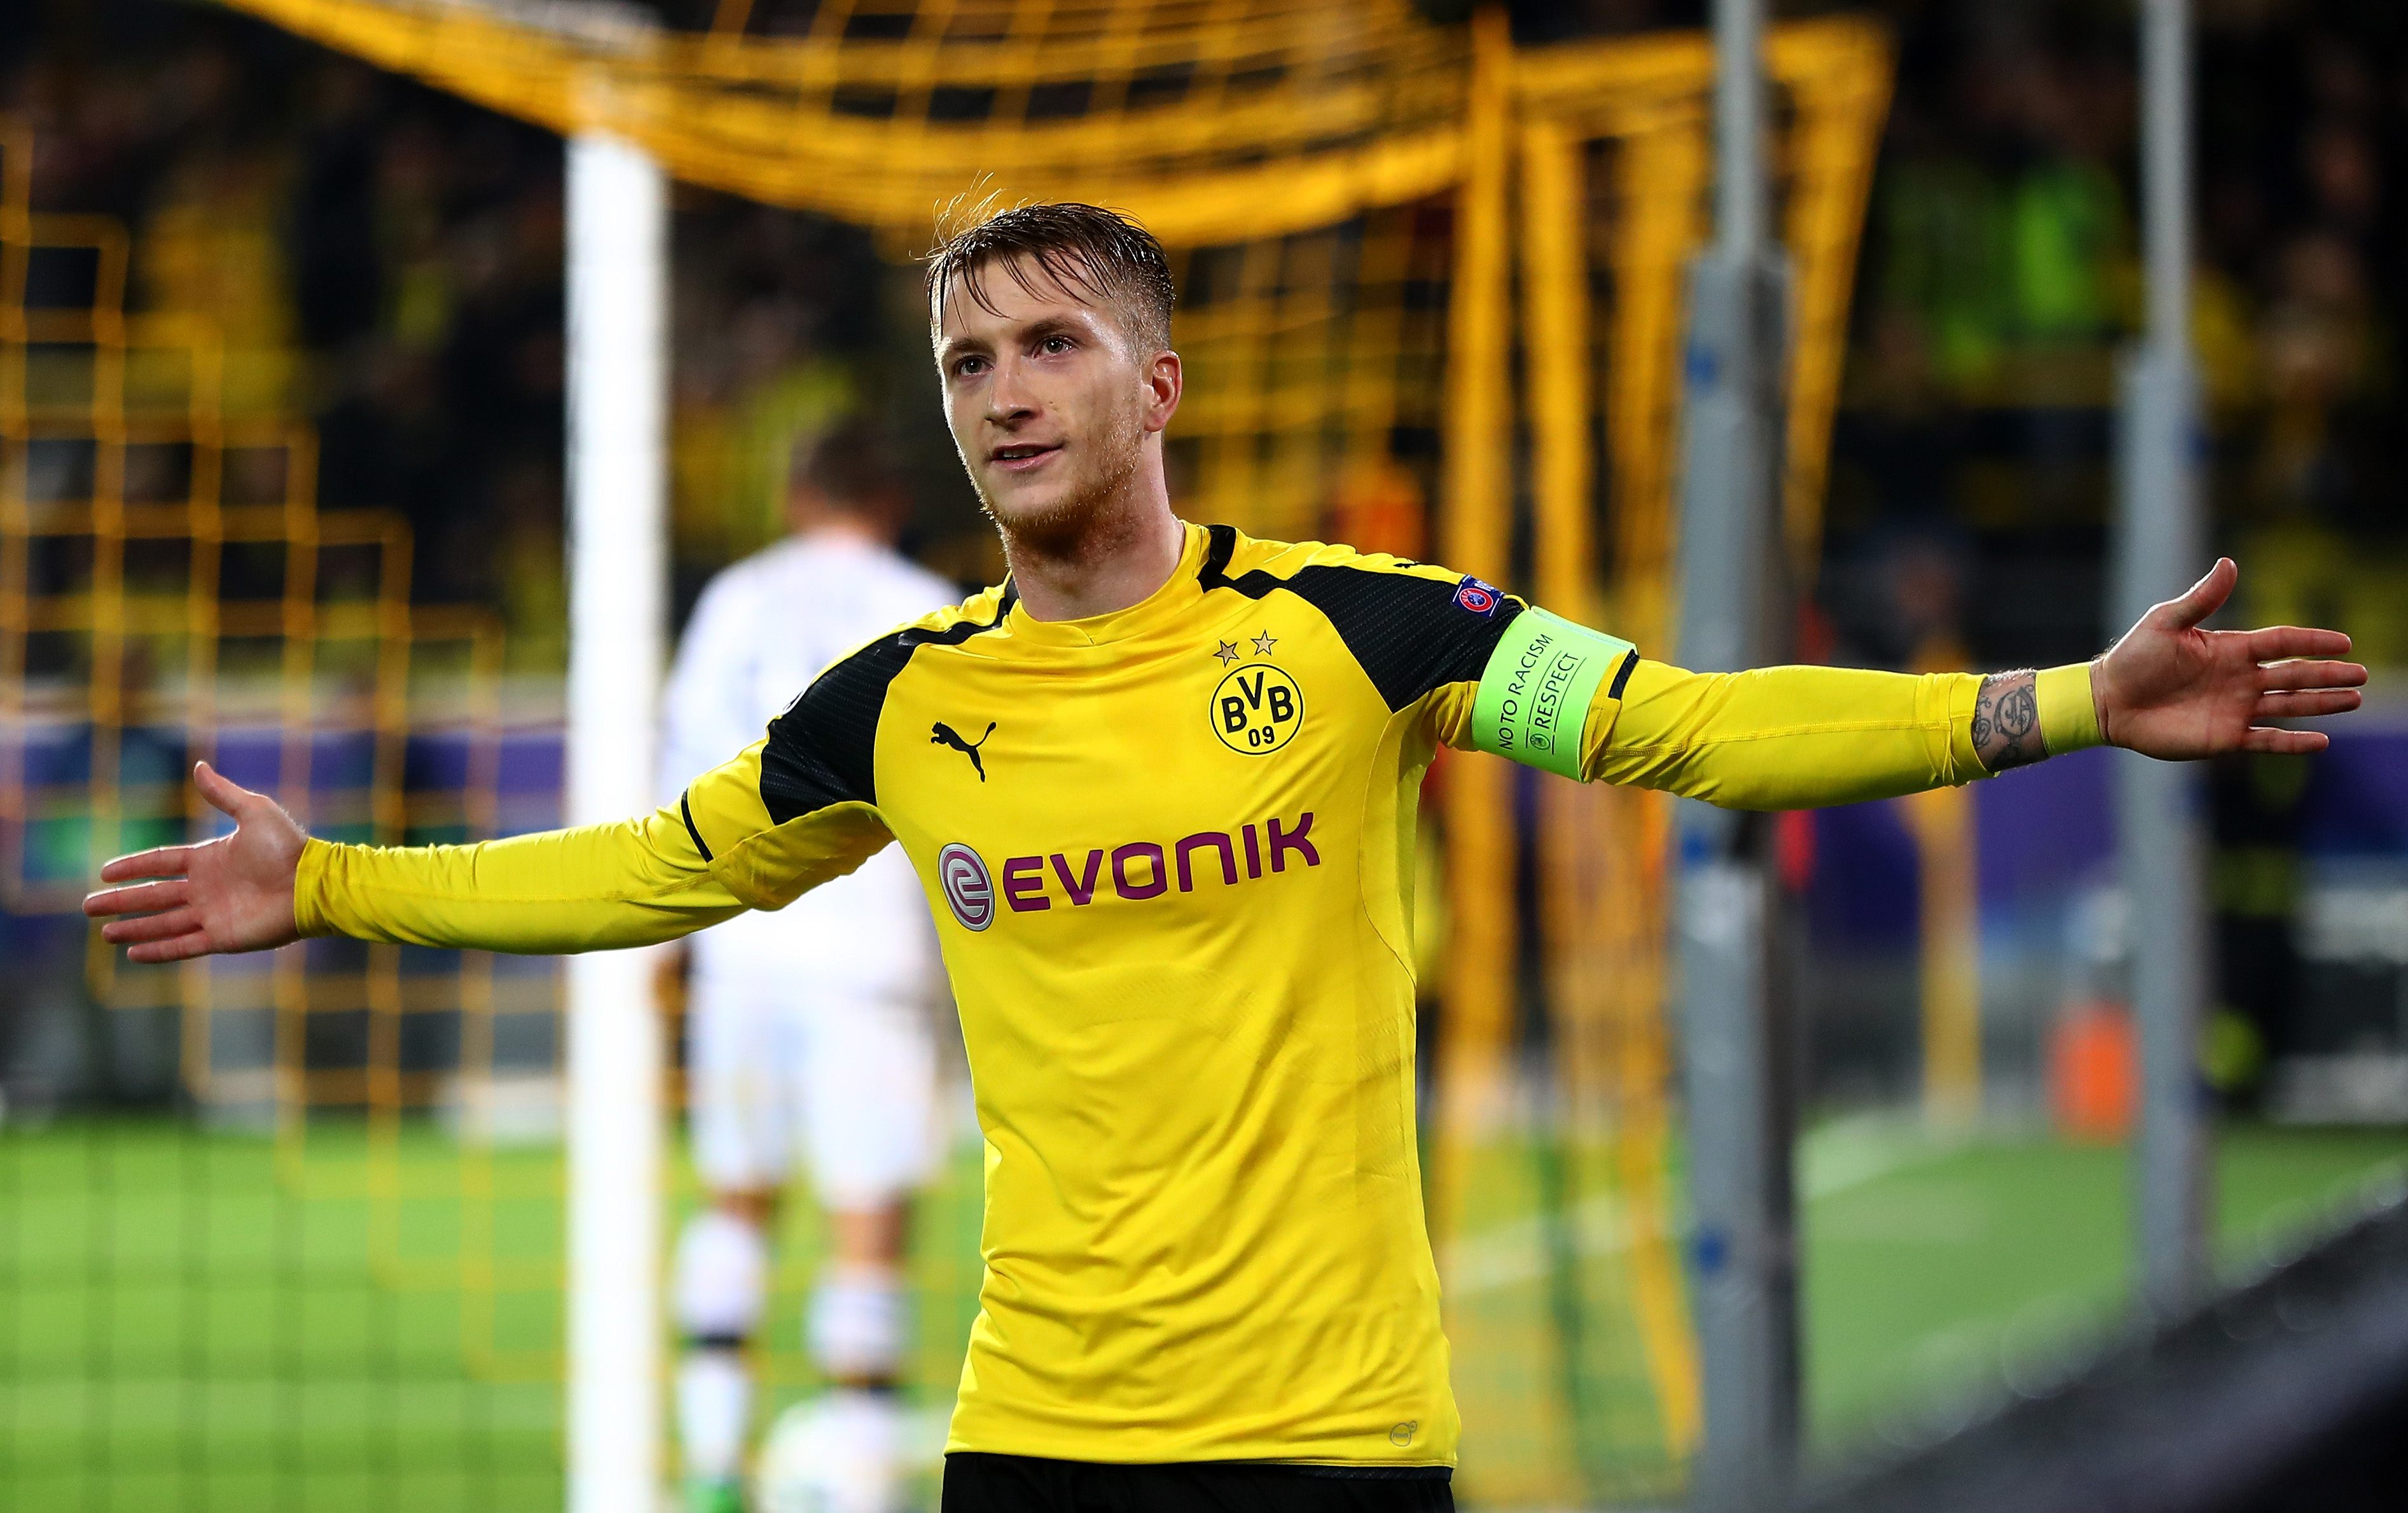 DORTMUND, GERMANY - NOVEMBER 22:  Marco Reus of Borussia Dortmund celebrates scoring his third and his teams eighth during the UEFA Champions League Group F match between Borussia Dortmund and Legia Warszawa at Signal Iduna Park on November 22, 2016 in Dortmund, North Rhine-Westphalia.  (Photo by Alex Grimm/Bongarts/Getty Images)